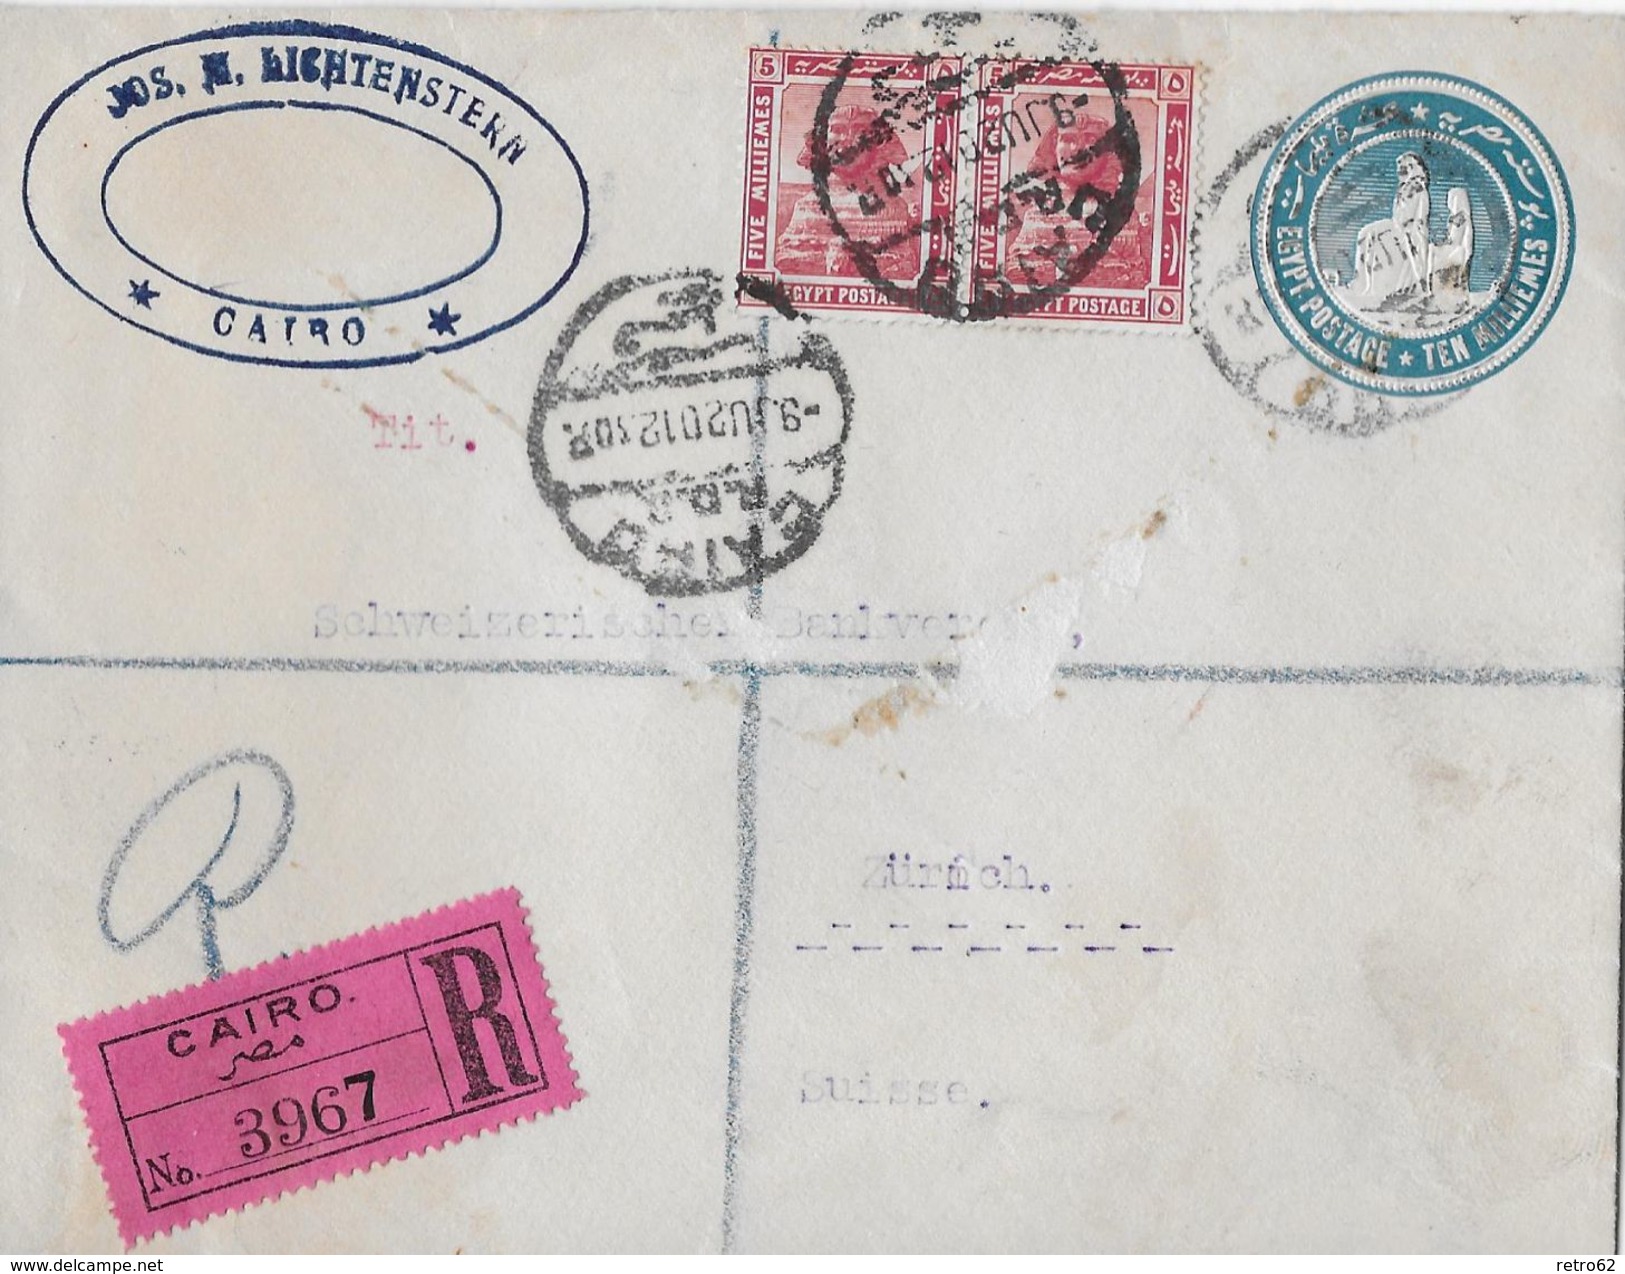 ÄGYPTEN / EGYPT POSTAGE 1920 - R-Letter With Additional Franking From Cairo To Suisse - 1915-1921 Protectorat Britannique